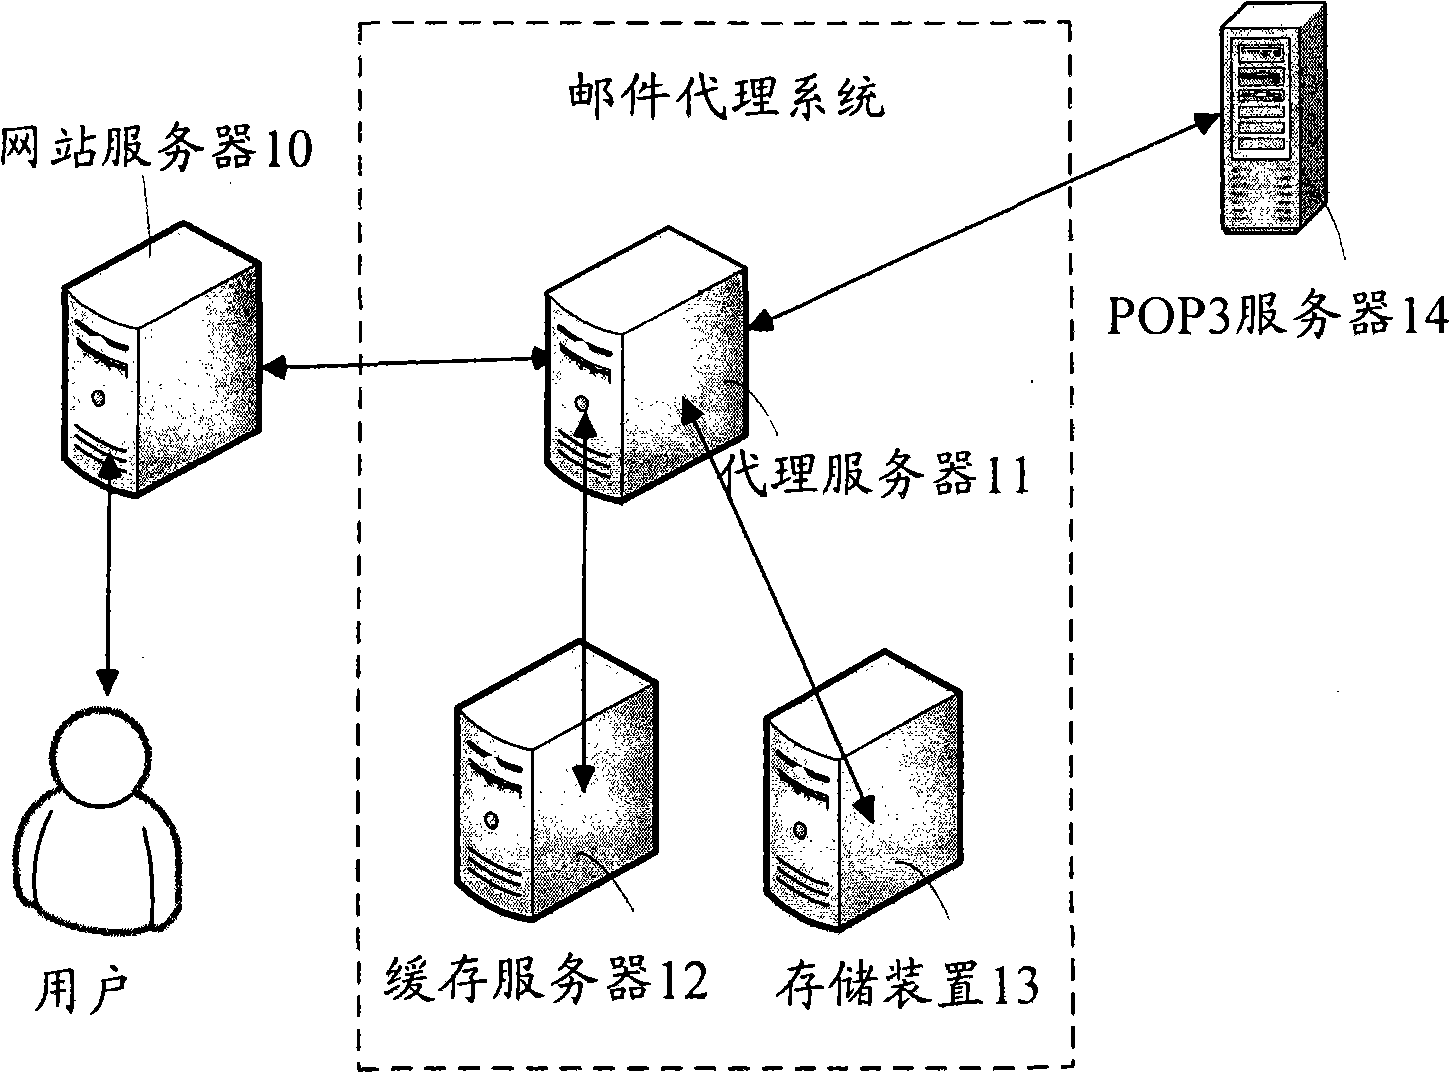 Method, apparatus and system for processing electronic mail